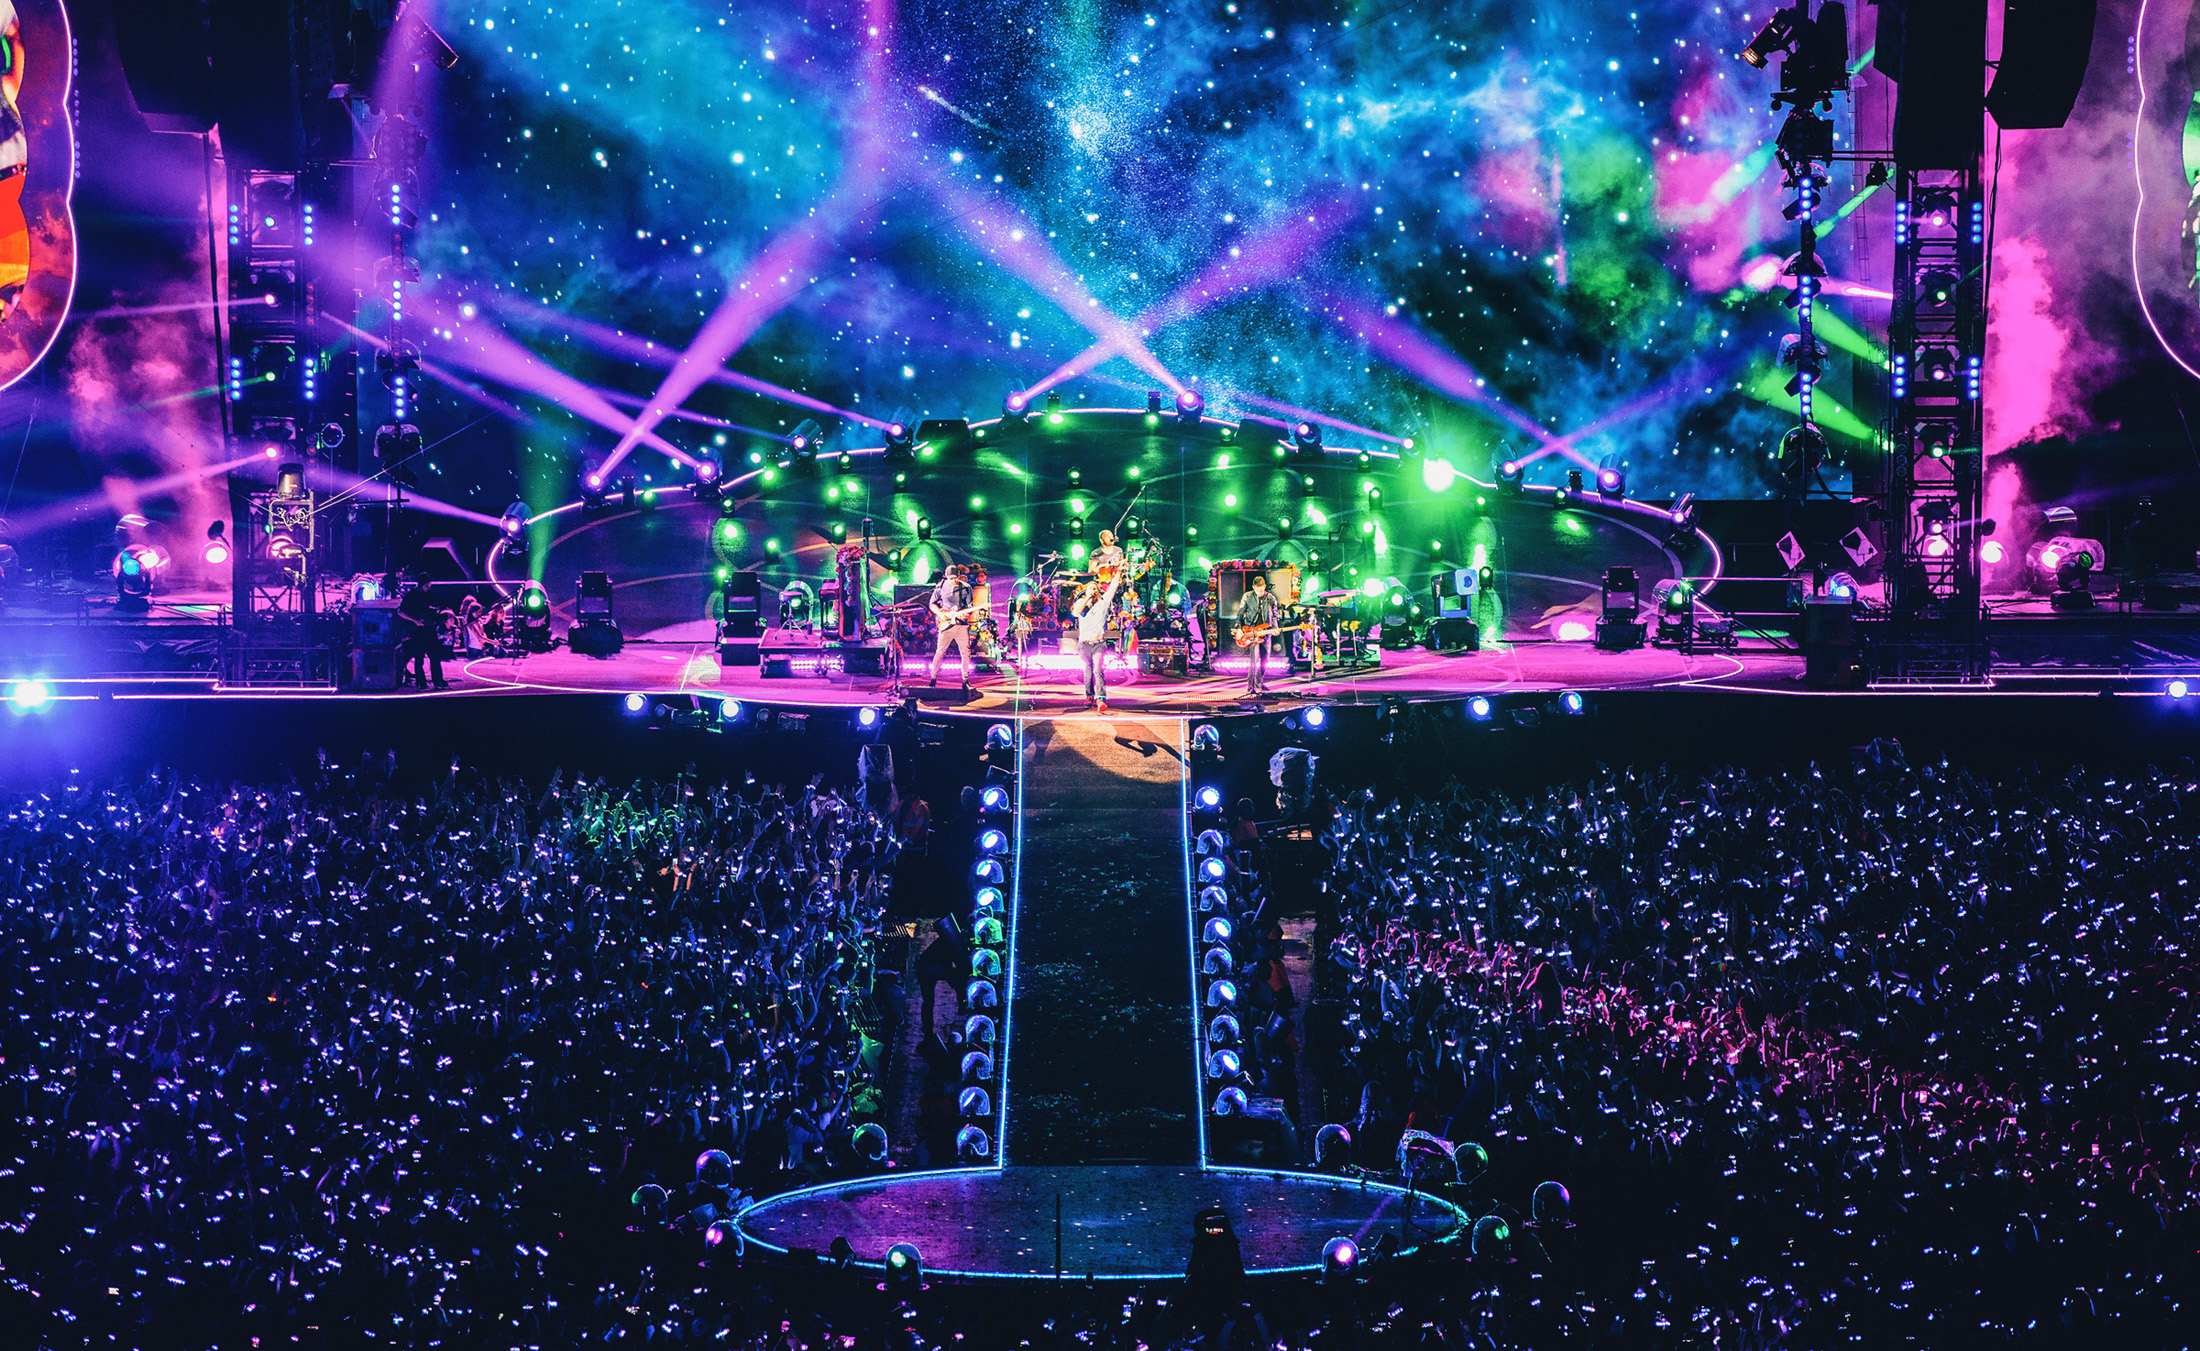 Coldplay's Concert Tour Movie Shows 'A Head Full of Dreams' Lighting Up